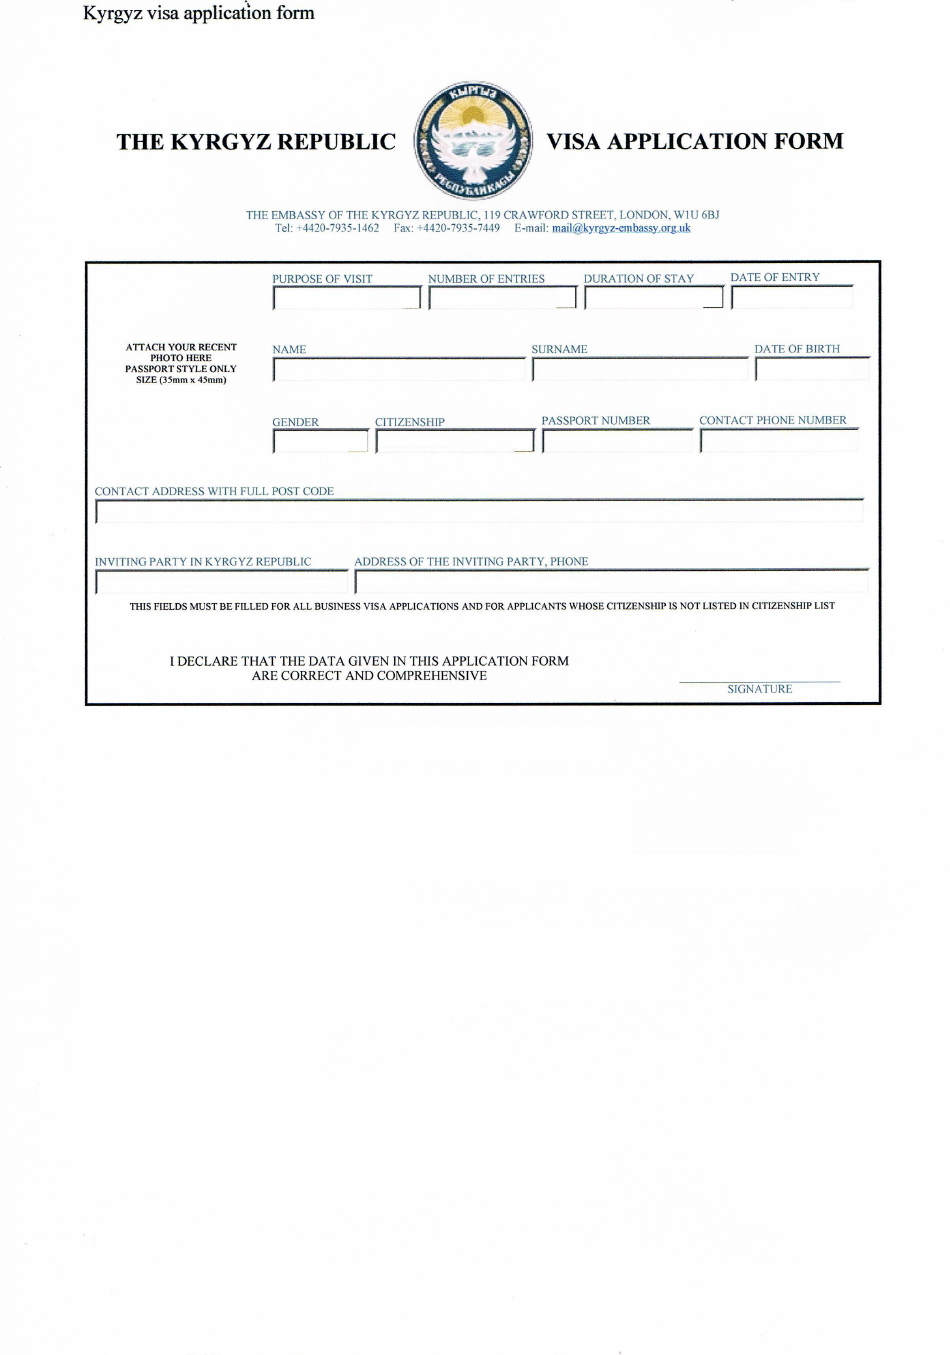 Kygyz Visa Application Form - the Embassy of the Kyrgyz Republic - Greater London, United Kingdom, Page 1